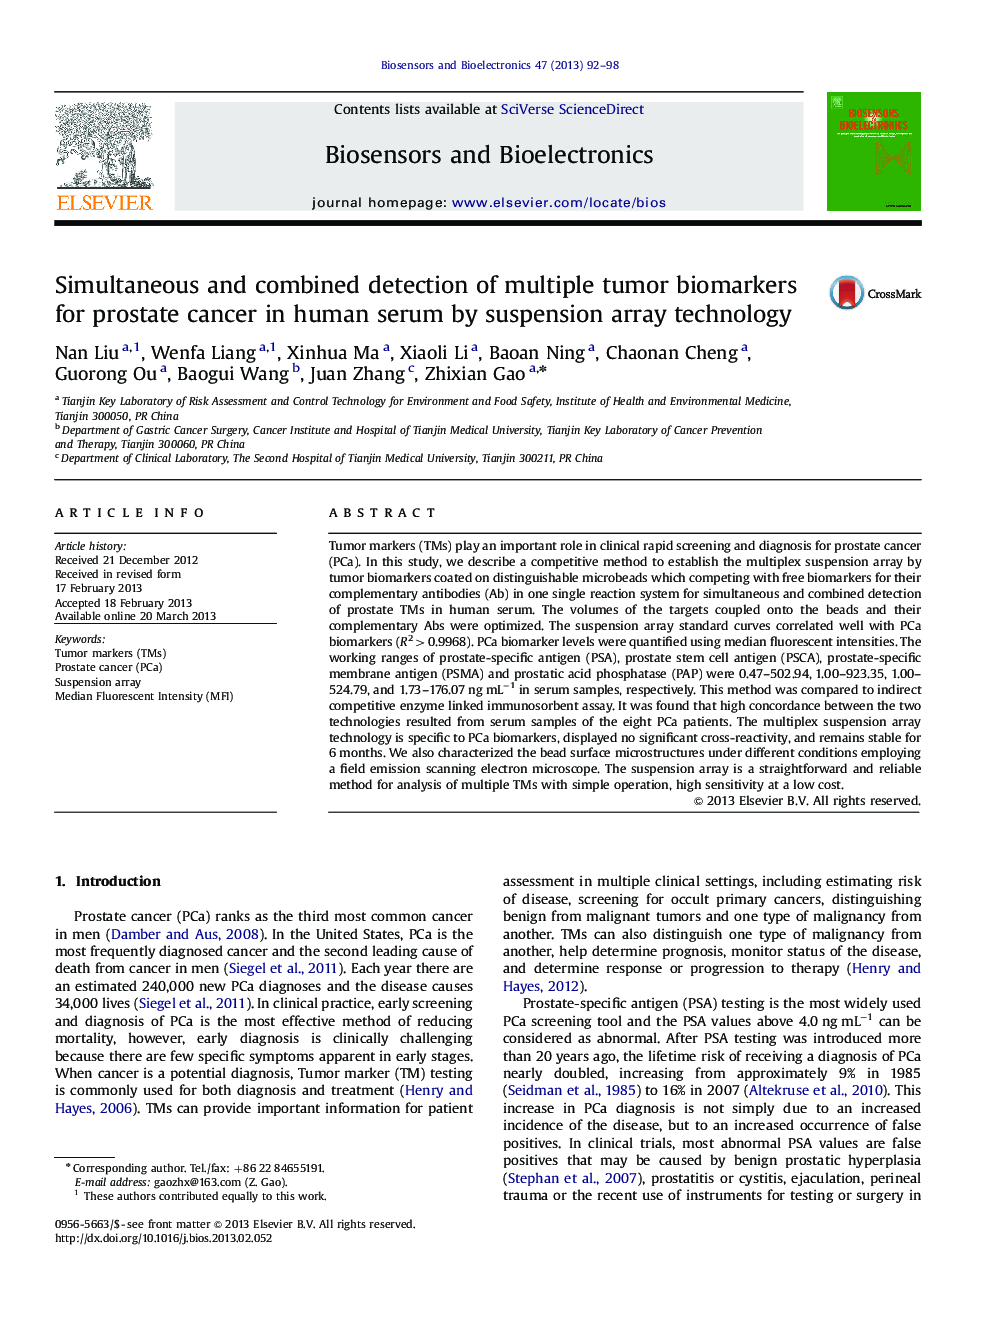 Simultaneous and combined detection of multiple tumor biomarkers for prostate cancer in human serum by suspension array technology